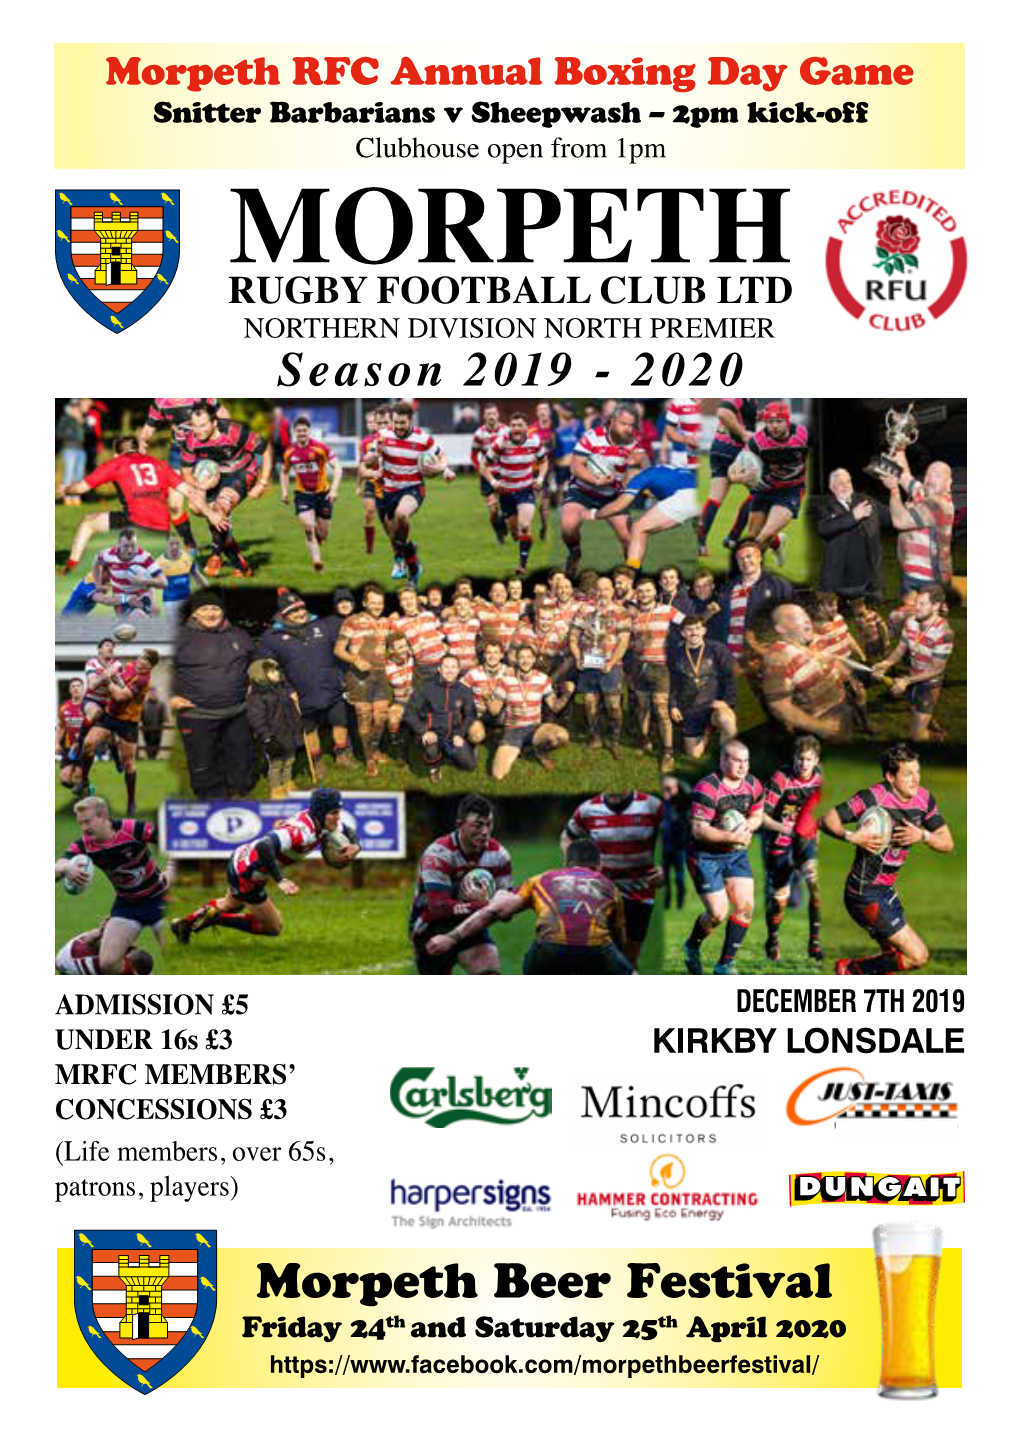 Morpeth RFC Annual Boxing Day Game Snitter Barbarians V Sheepwash – 2Pm Kick-Off Clubhouse Open from 1Pm